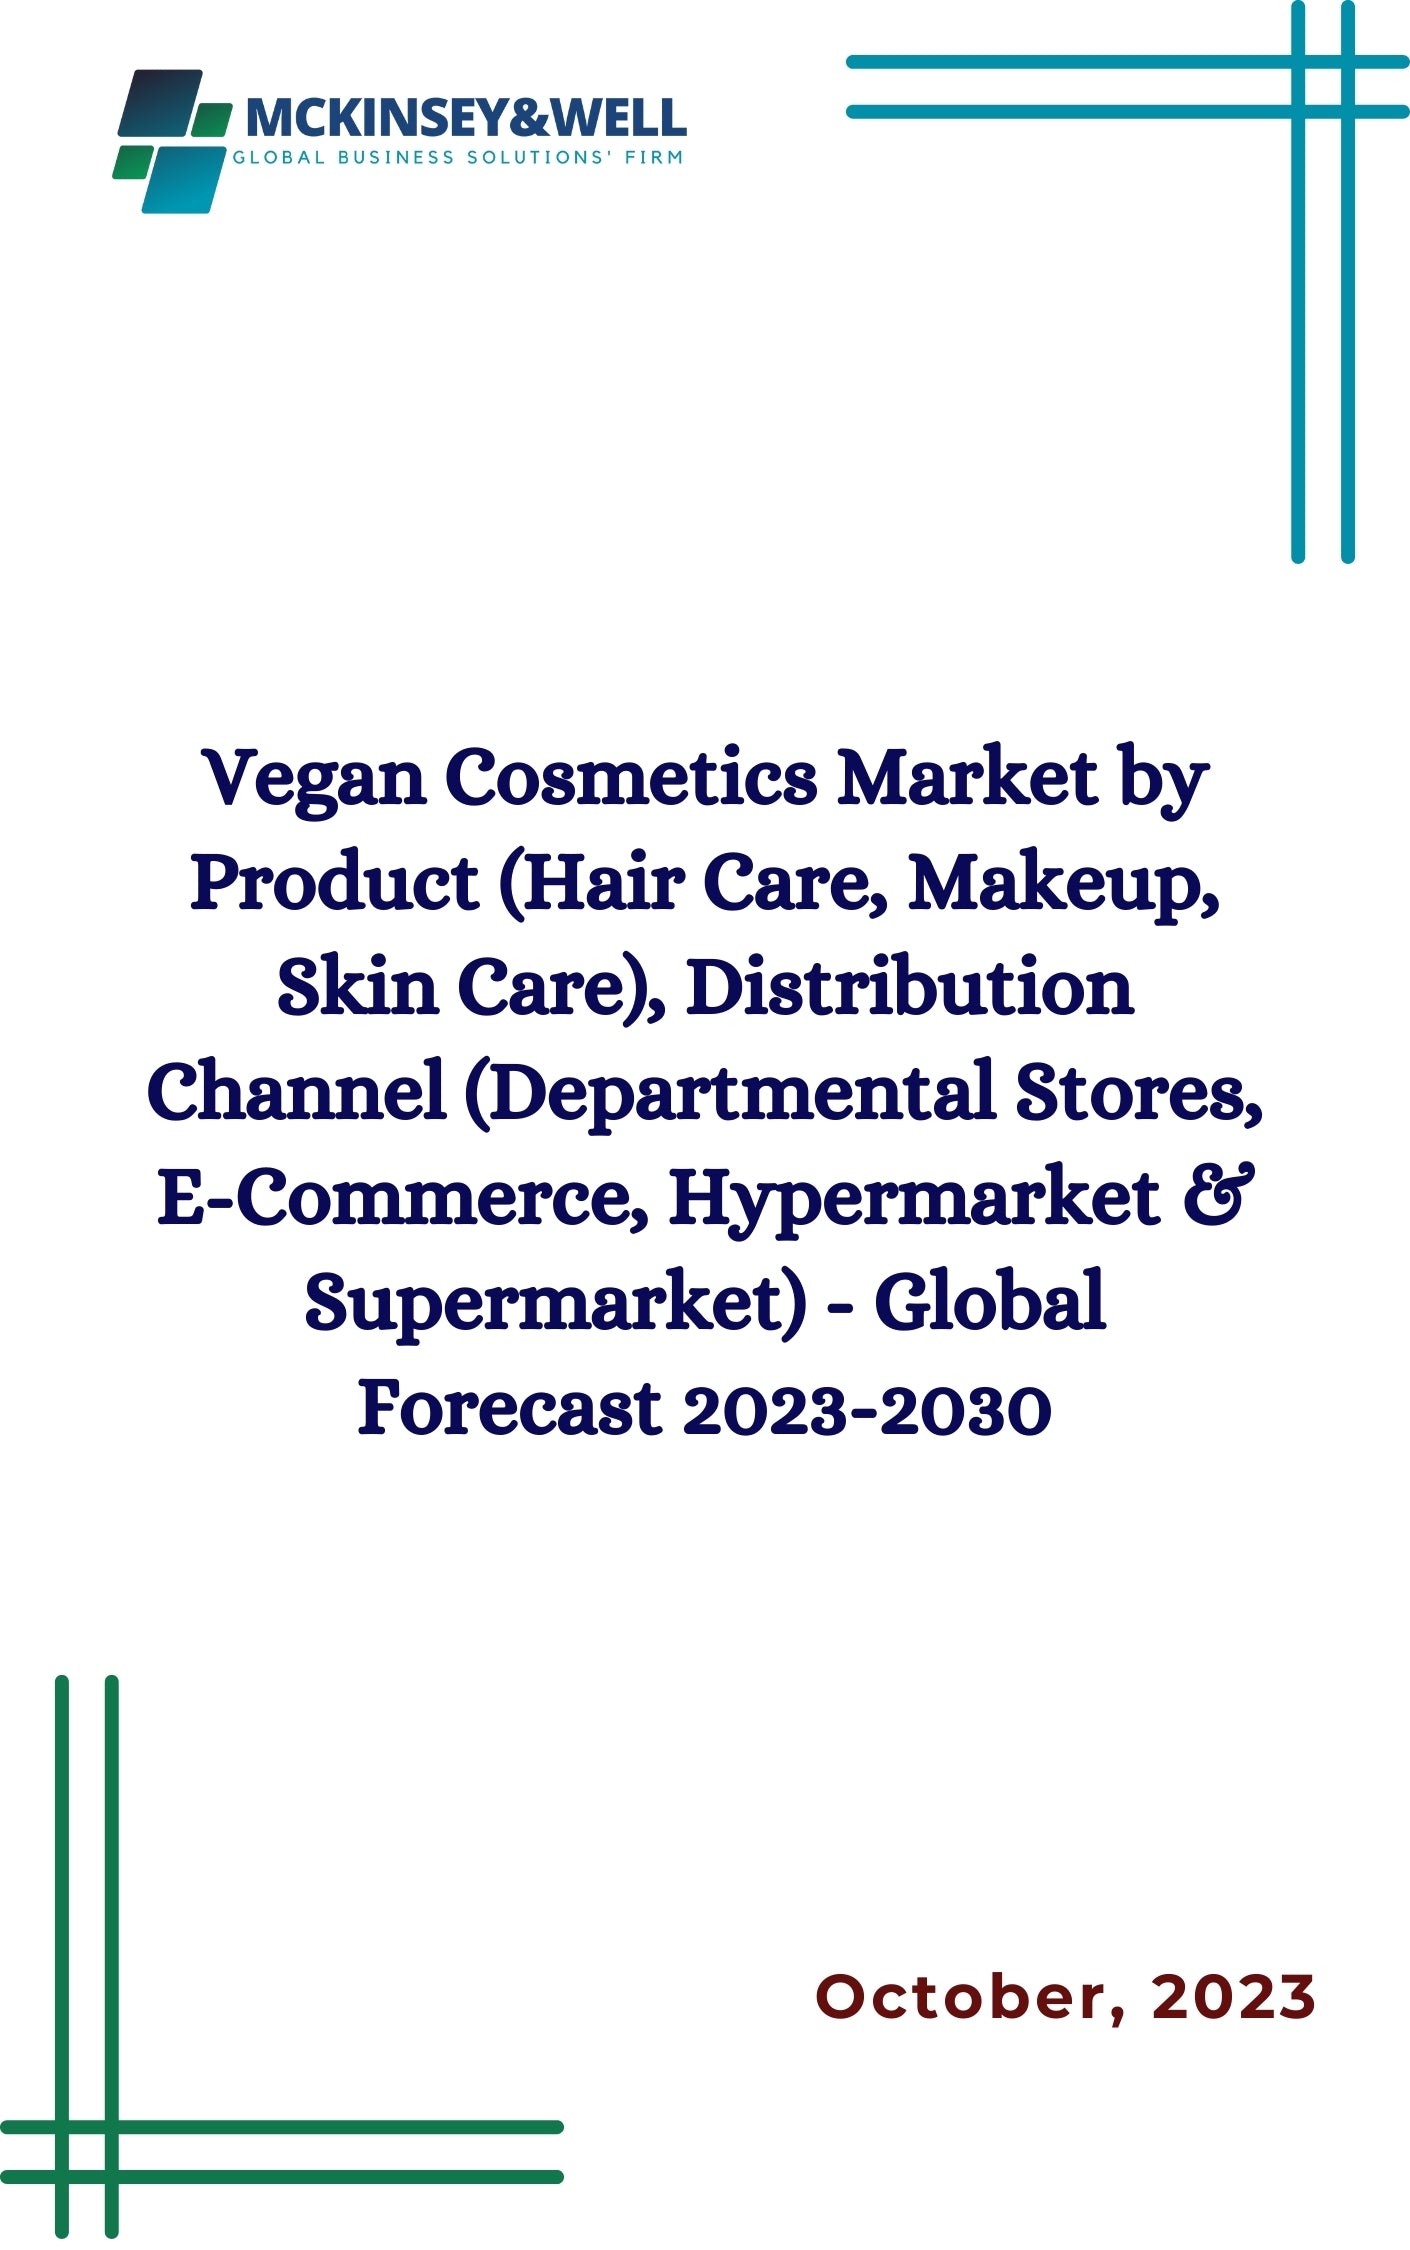 Vegan Cosmetics Market by Product (Hair Care, Makeup, Skin Care), Distribution Channel (Departmental Stores, E-Commerce, Hypermarket & Supermarket) - Global Forecast 2023-2030